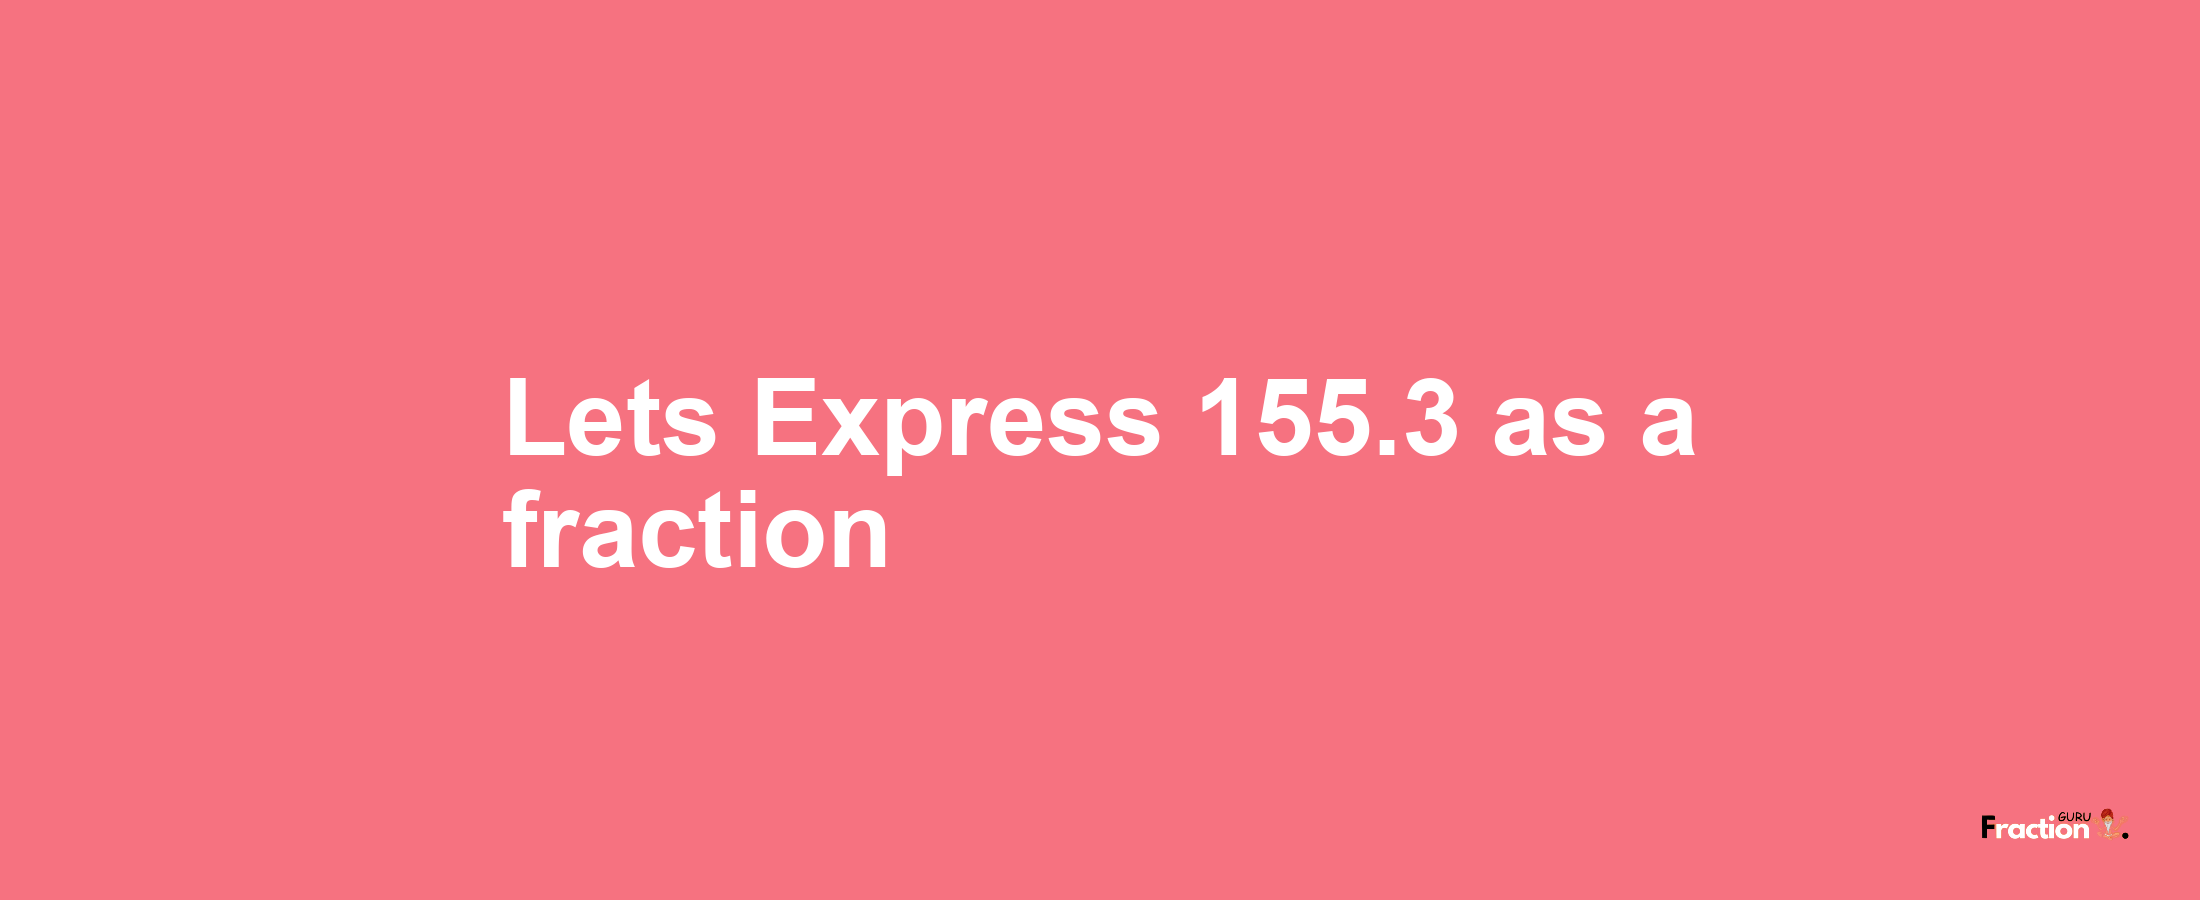 Lets Express 155.3 as afraction